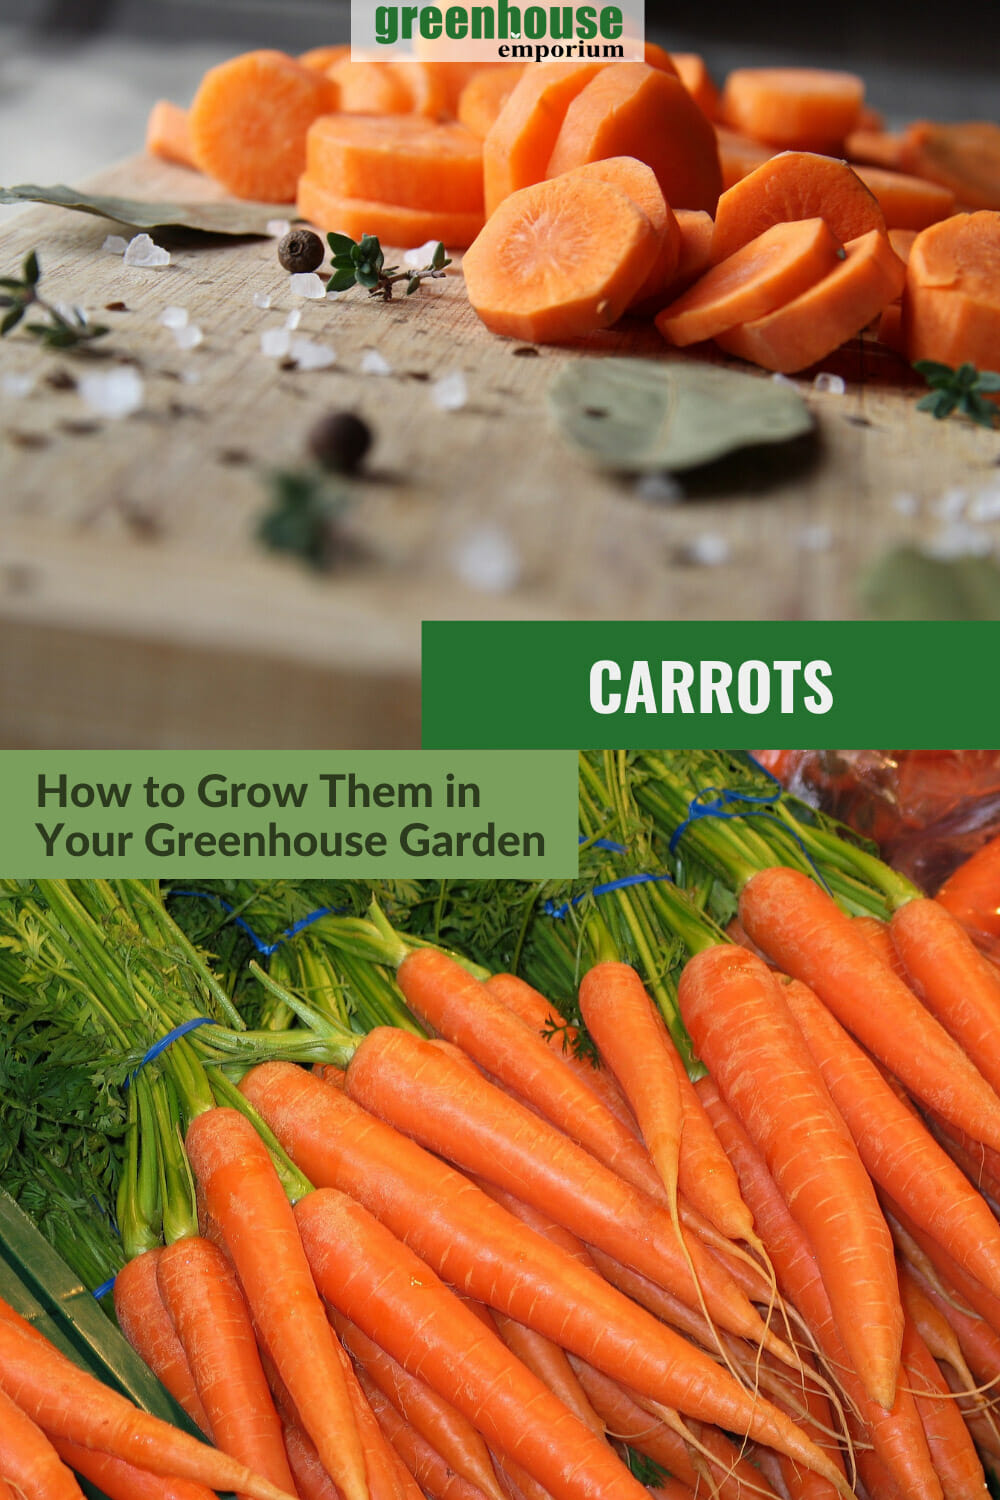 How To Grow Carrots In A Greenhouse | Greenhouse Emporium